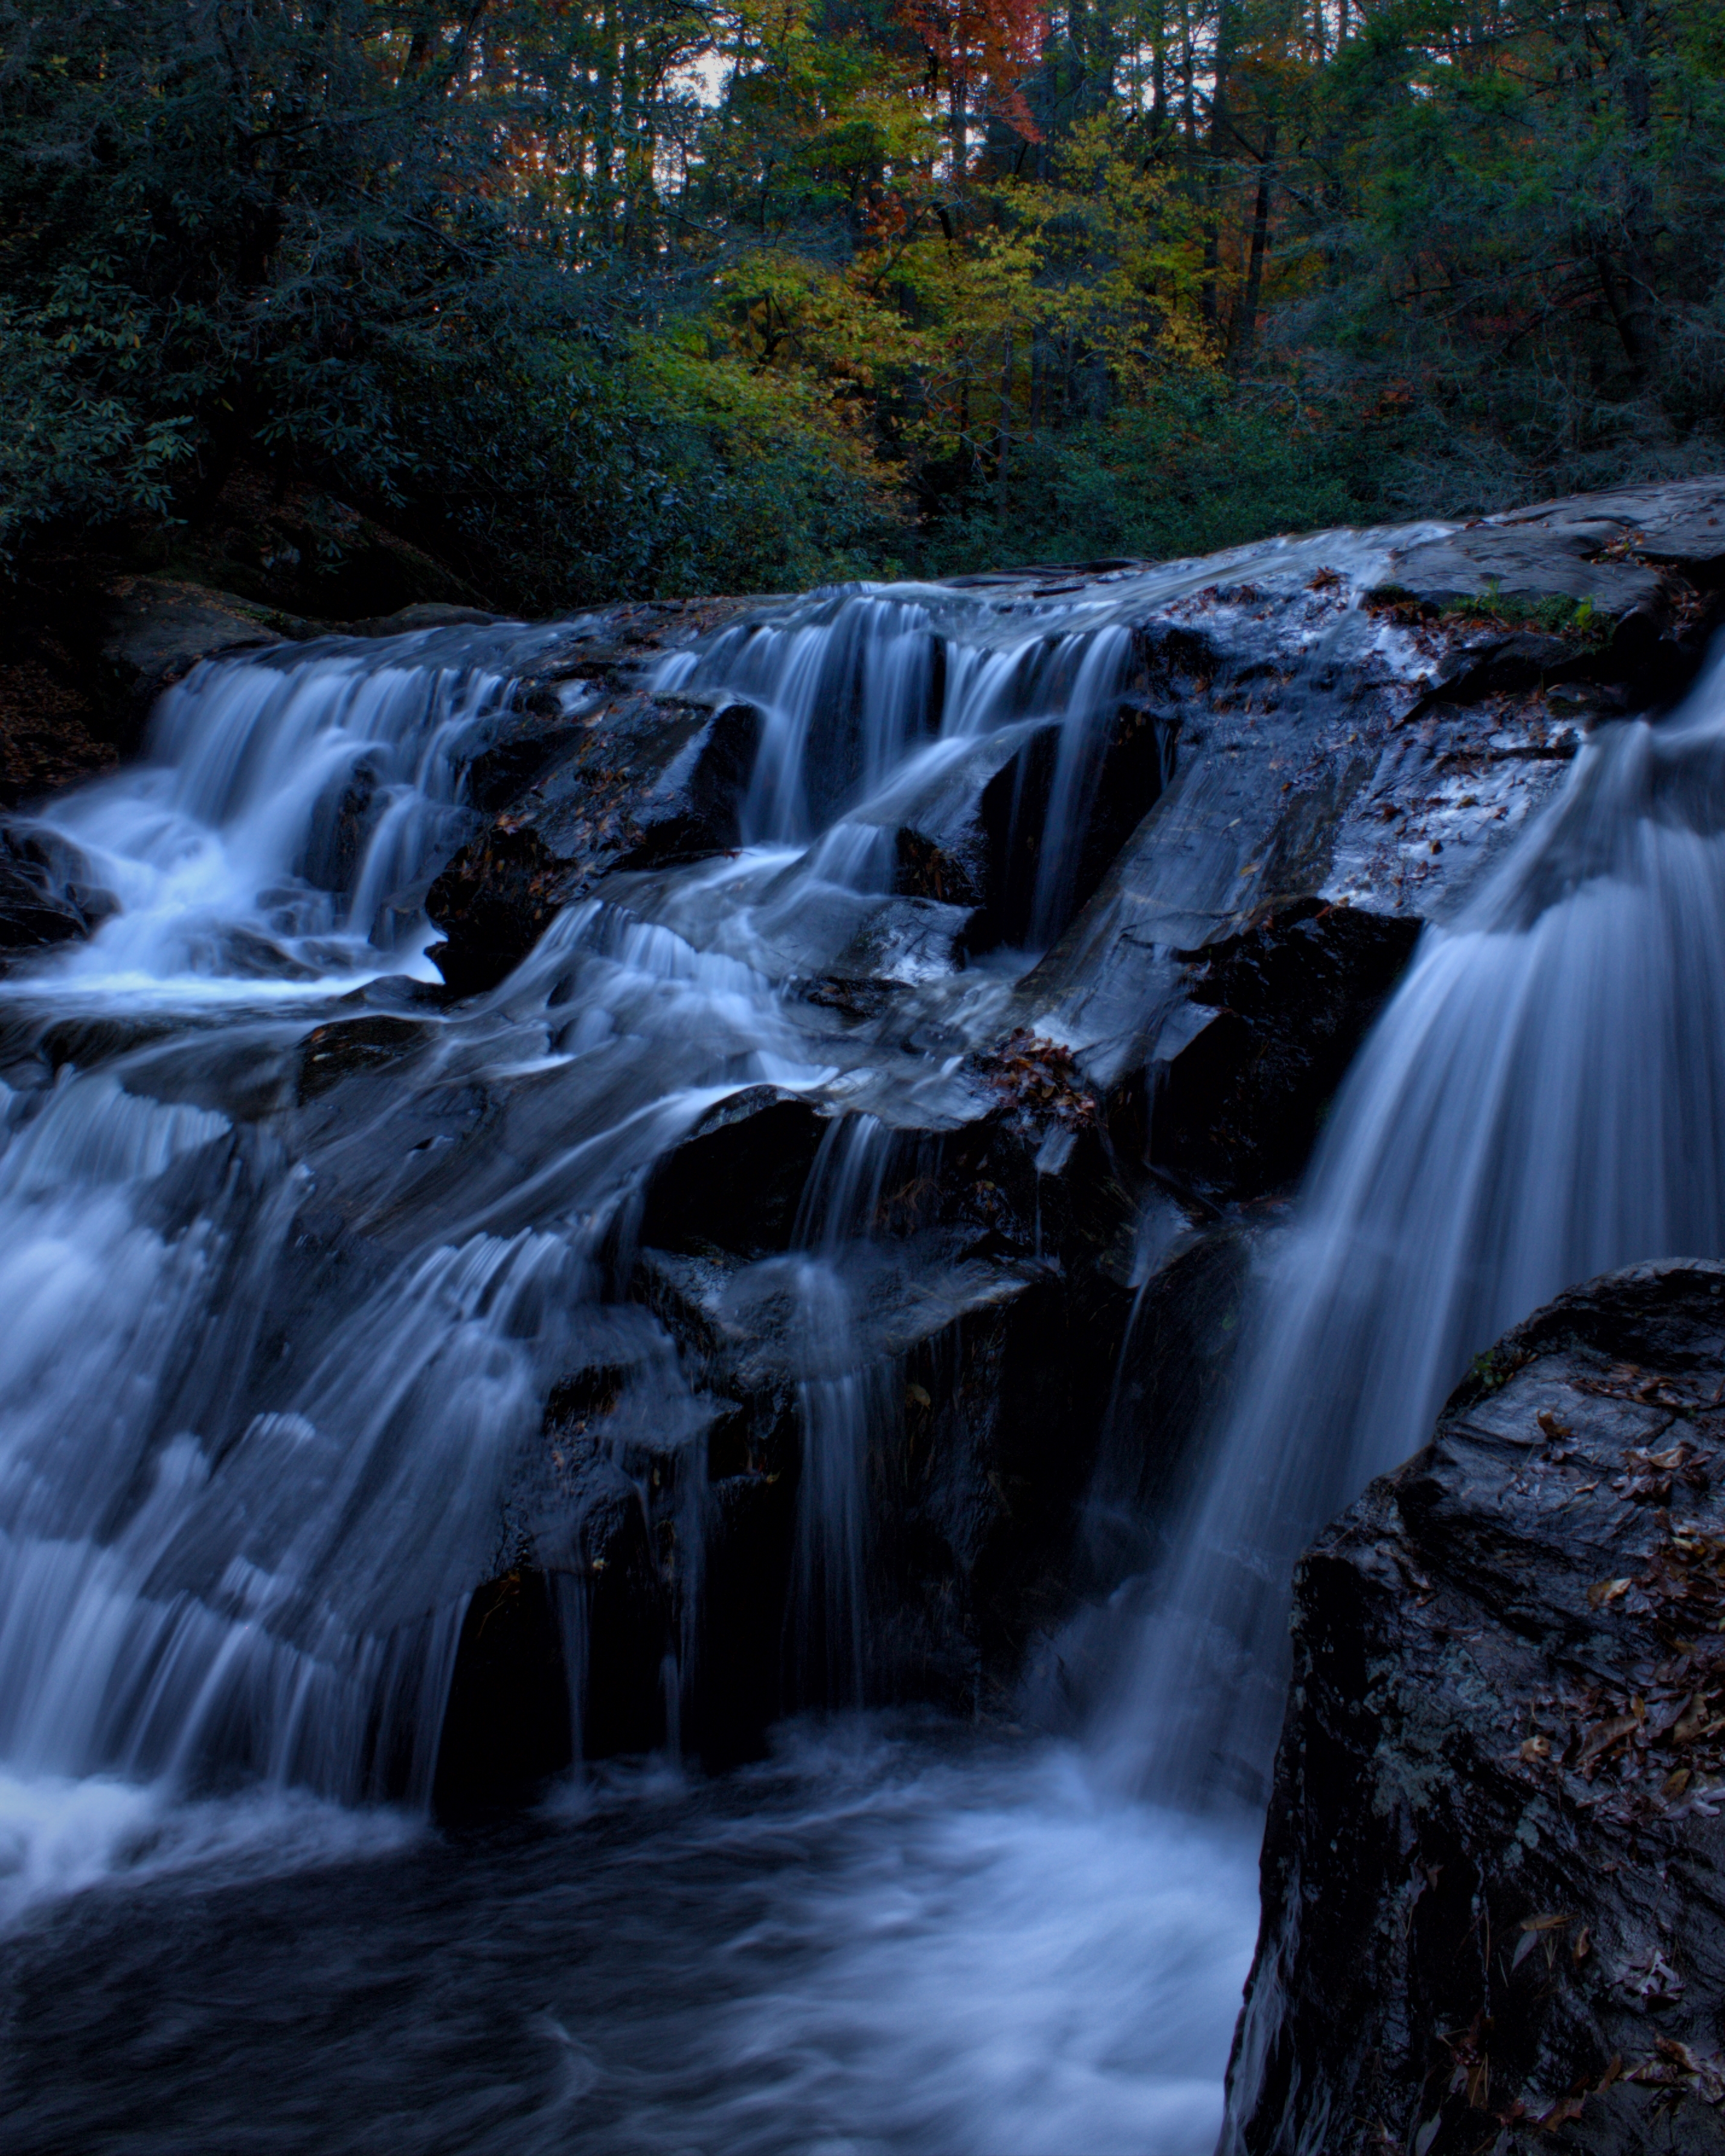 Waterfalls, ideas for outdoor romance